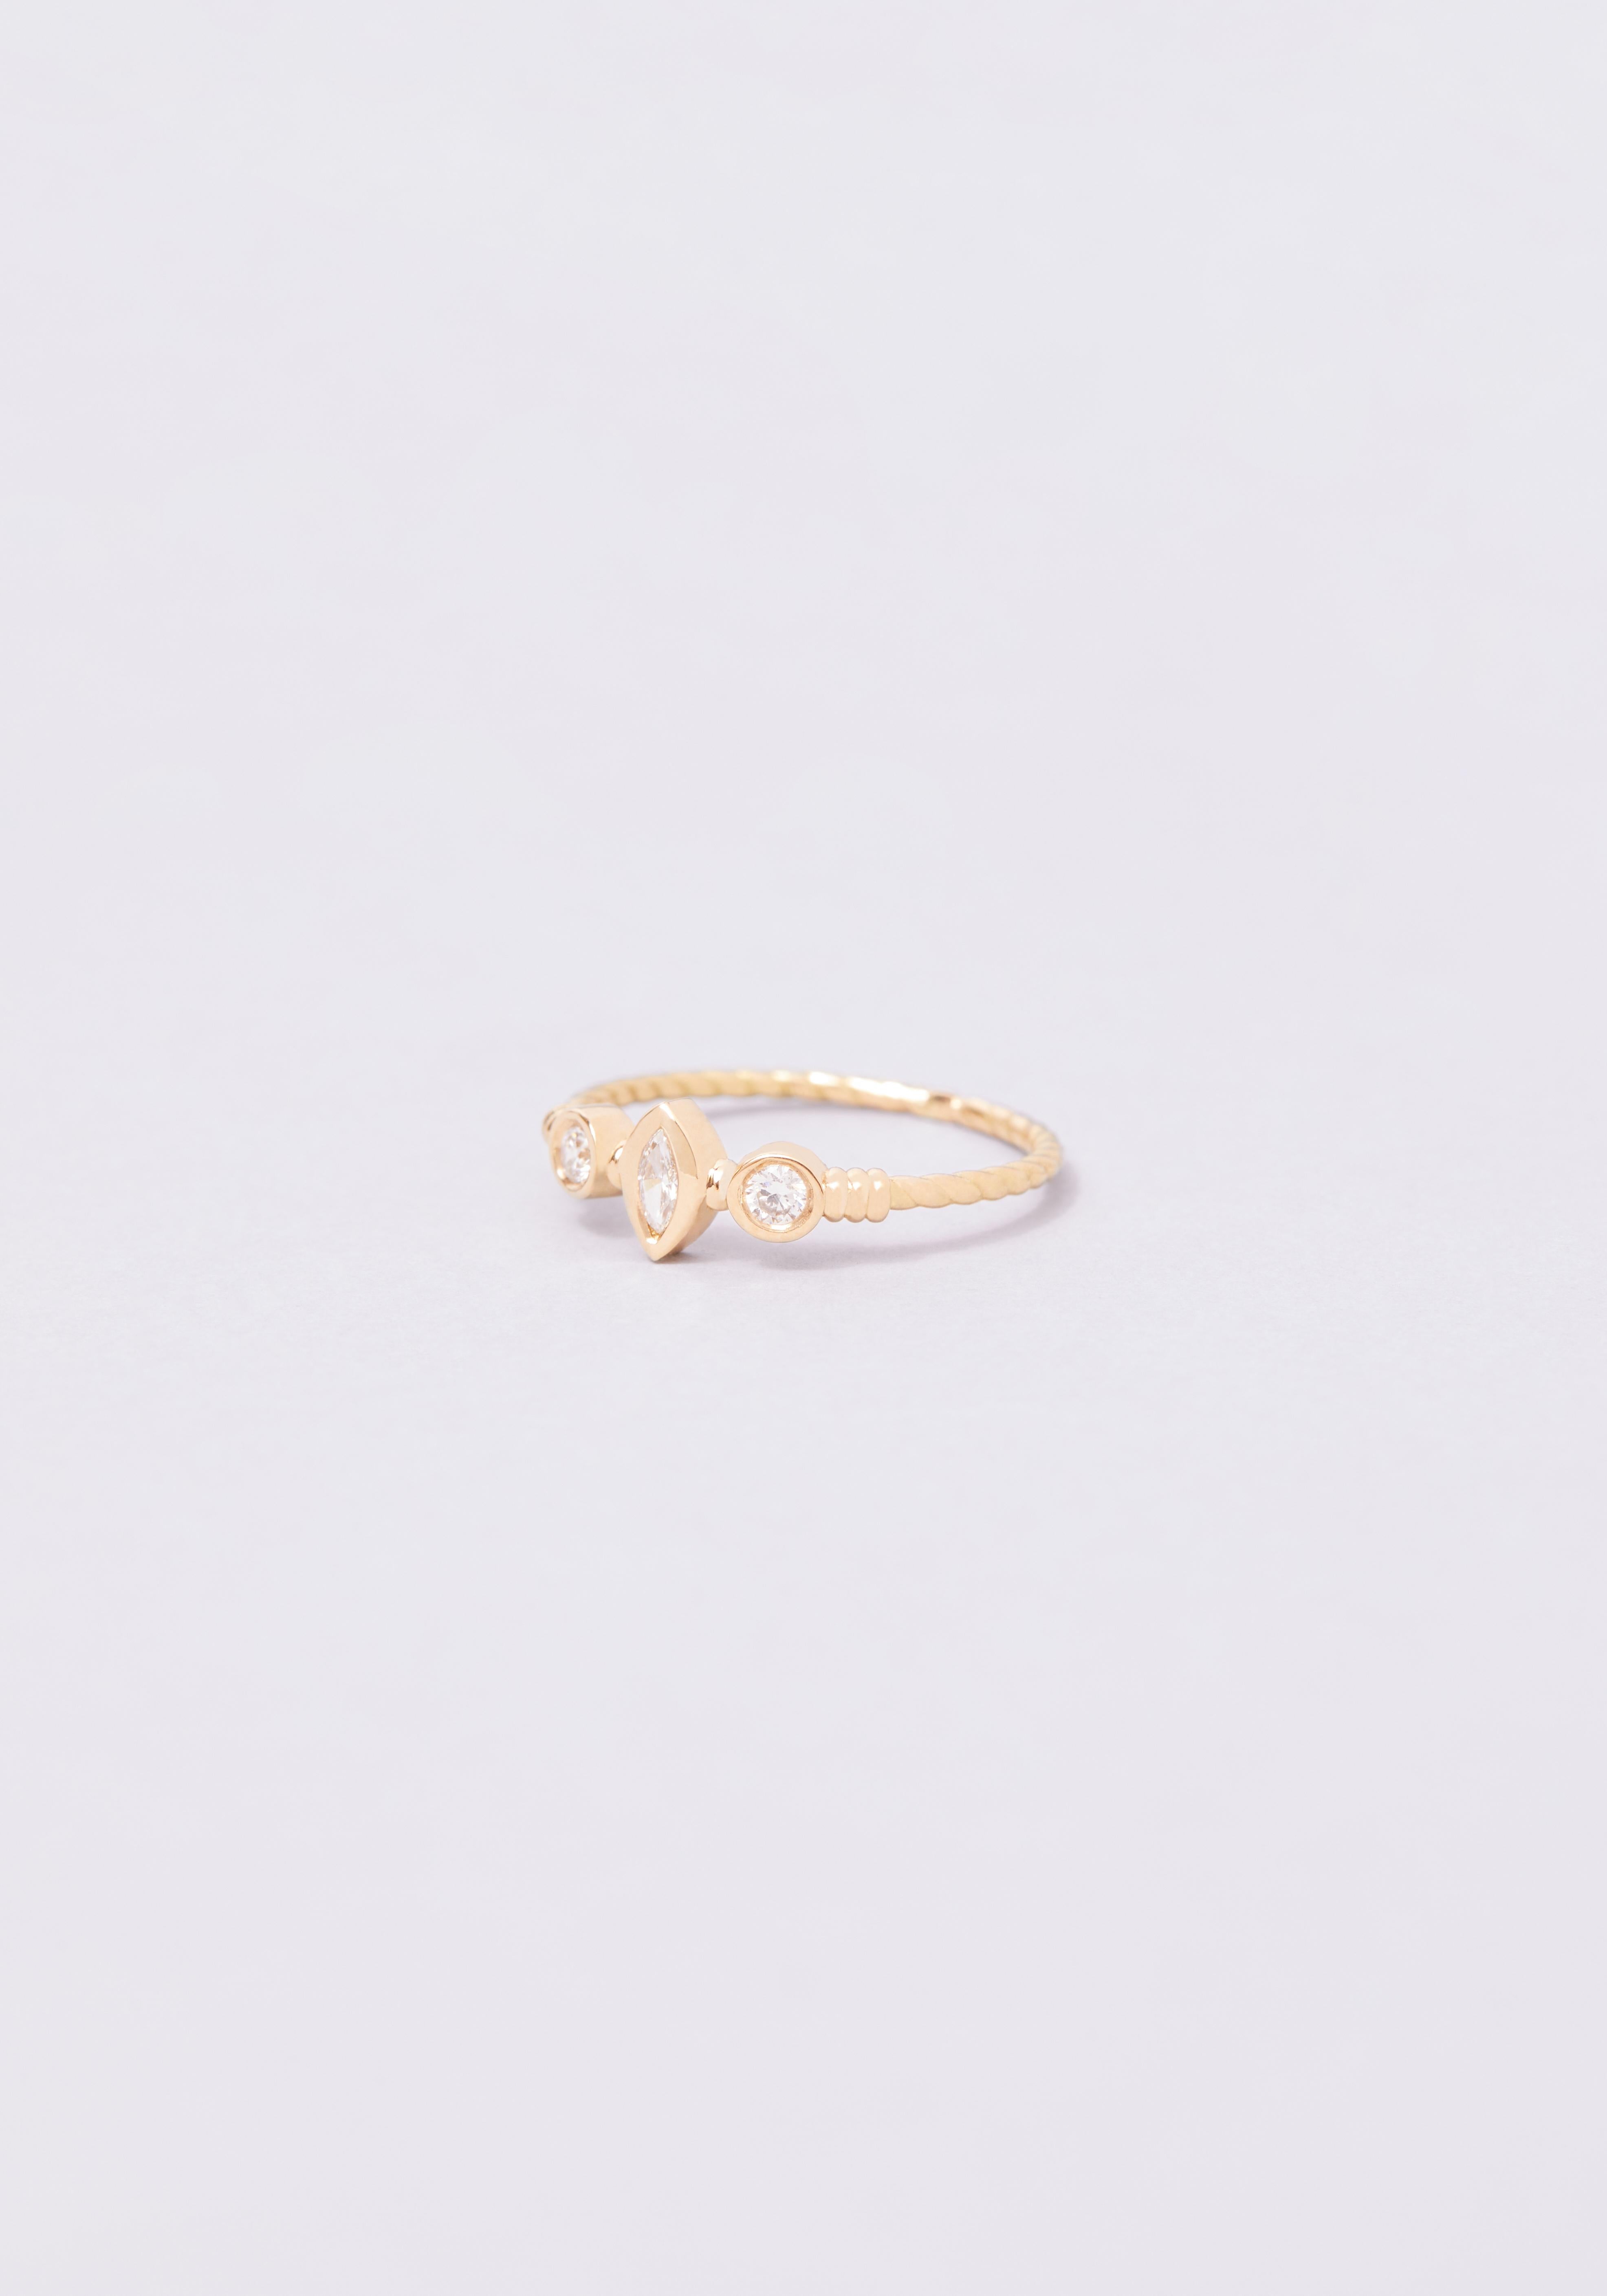 The Théa ring: a fusion of oval and round. This twisted ring is set with three white diamonds and presents a harmony of shapes in its utmost simplicity. It would make for the perfect engagement ring and is available in 18k yellow gold. The Théa ring